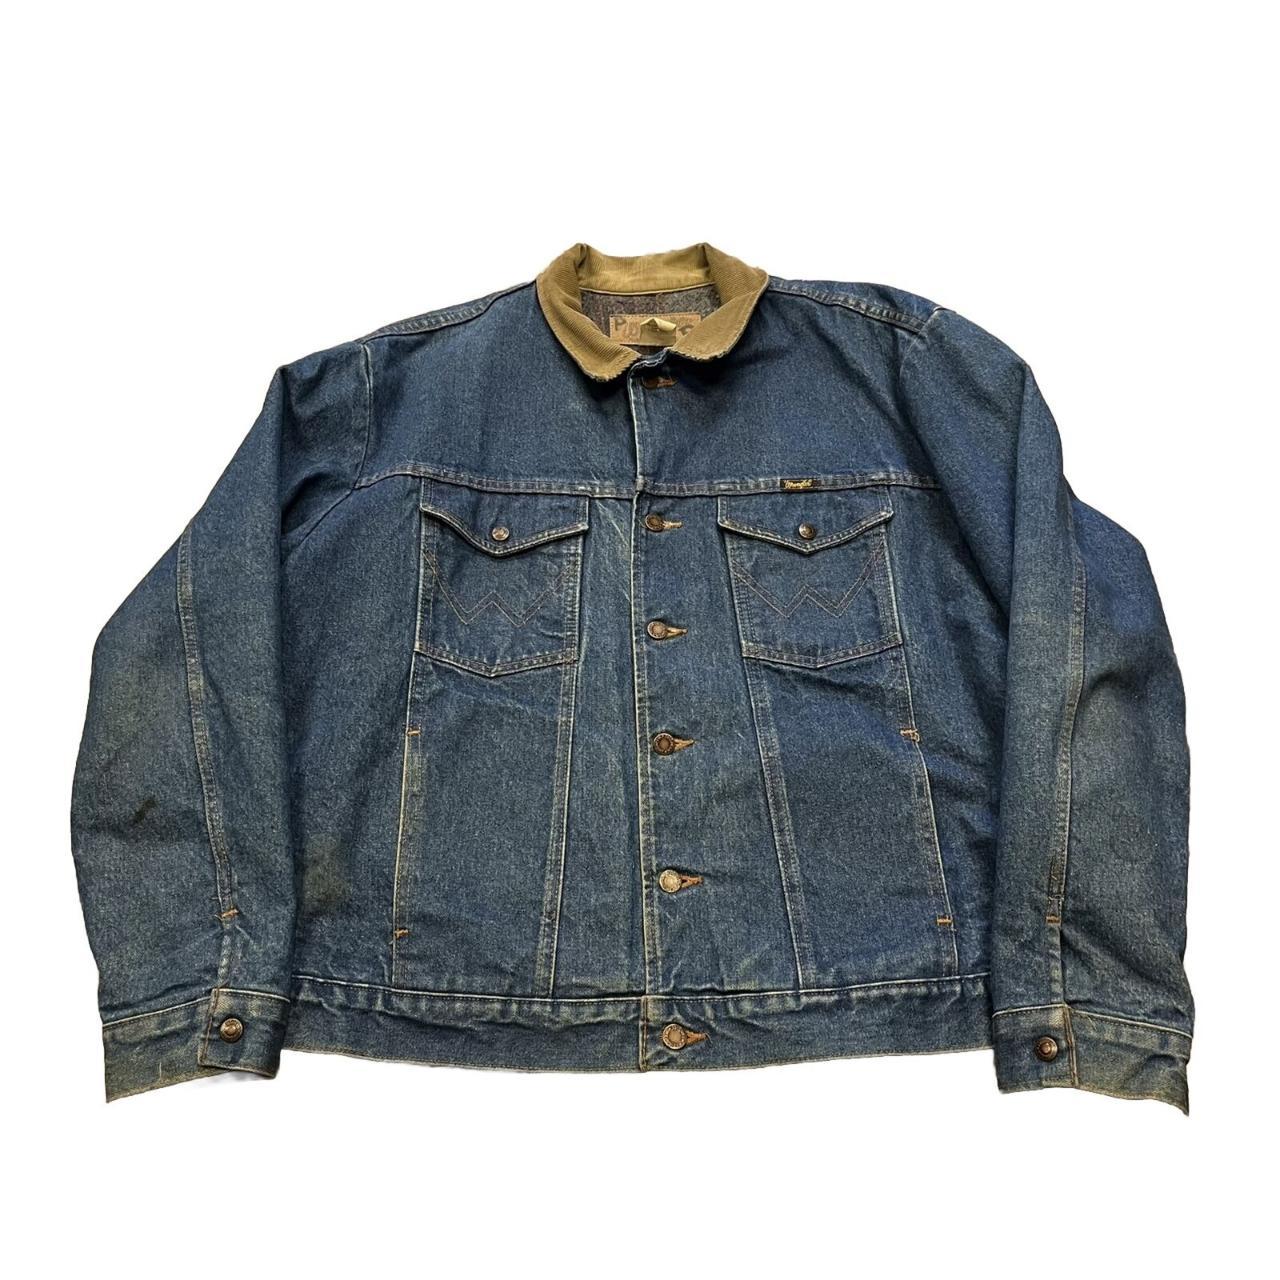 Wrangler mens Concealed Carry Blanket Lined Denim Jacket, Vintage Wash,  Small US : Buy Online at Best Price in KSA - Souq is now Amazon.sa: Fashion